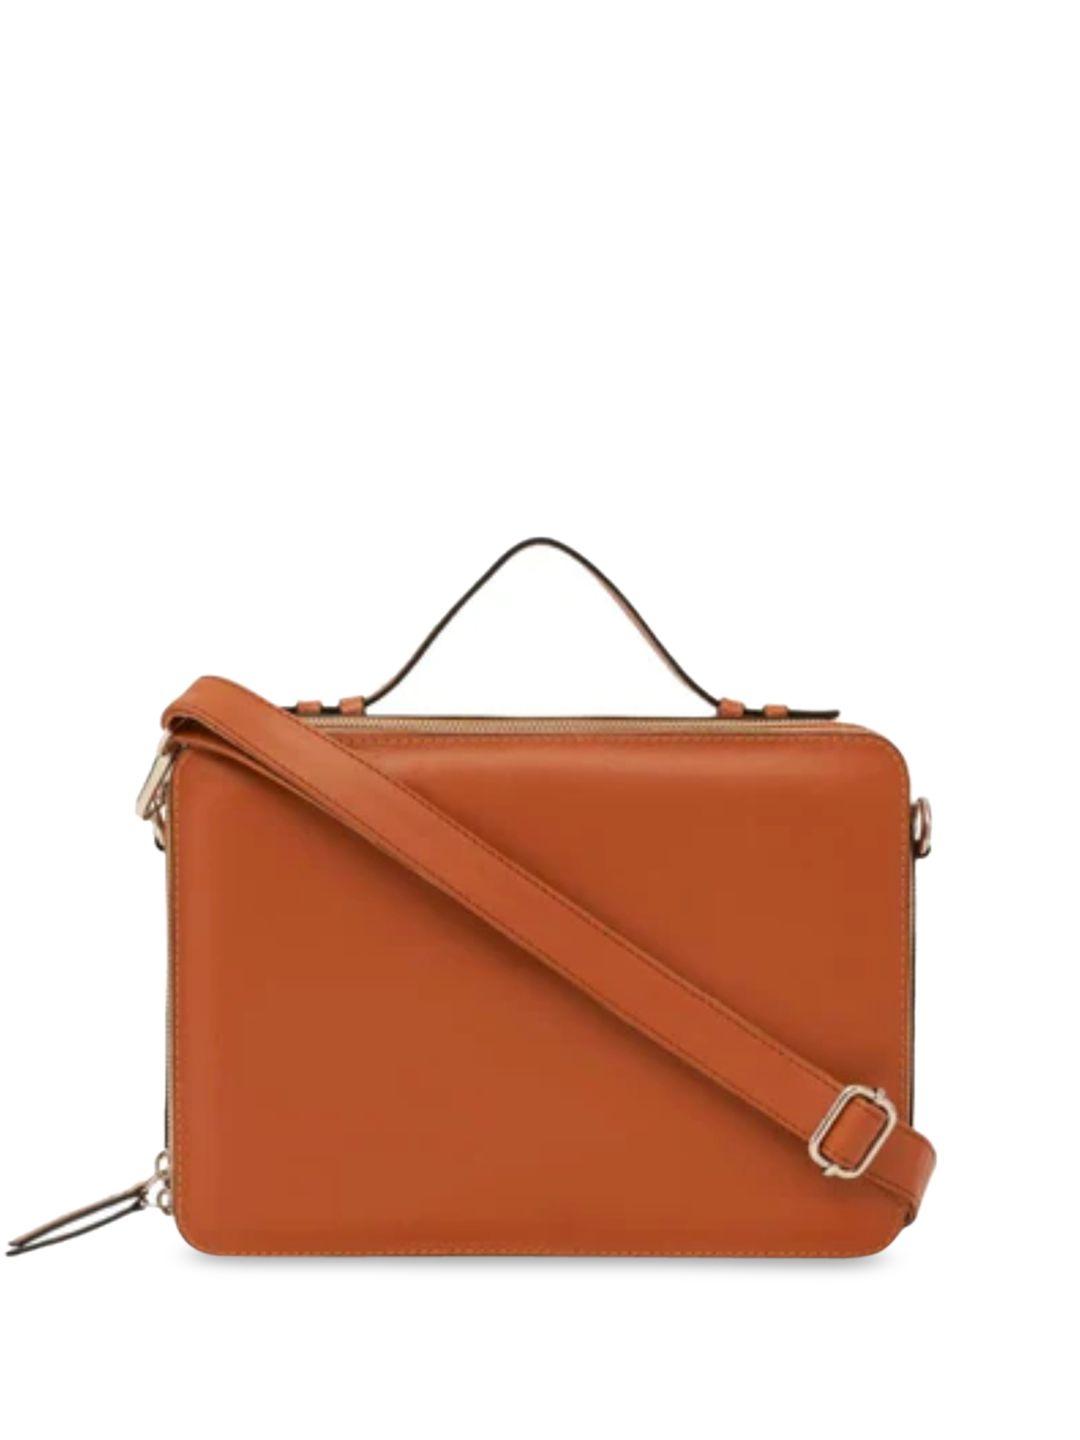 mistry structured leather satchel